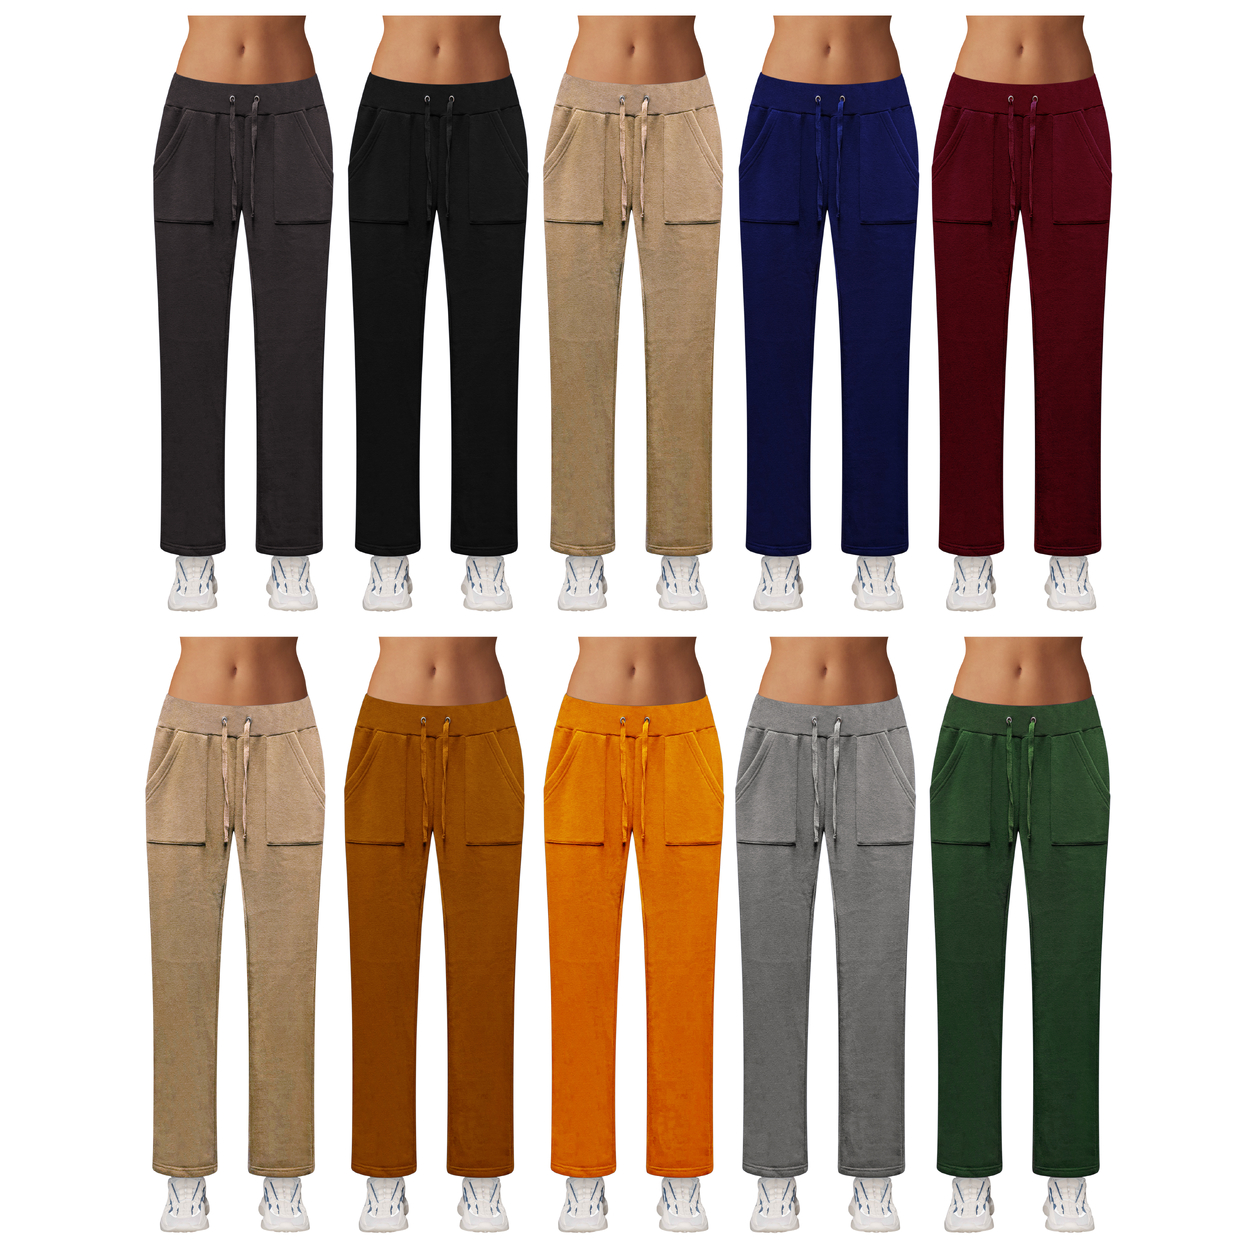 Multi-Pack: Women's Ultra-Soft Cozy Fleece Lined Elastic Waistband Terry Knit Pants - 1-Pack, X-large